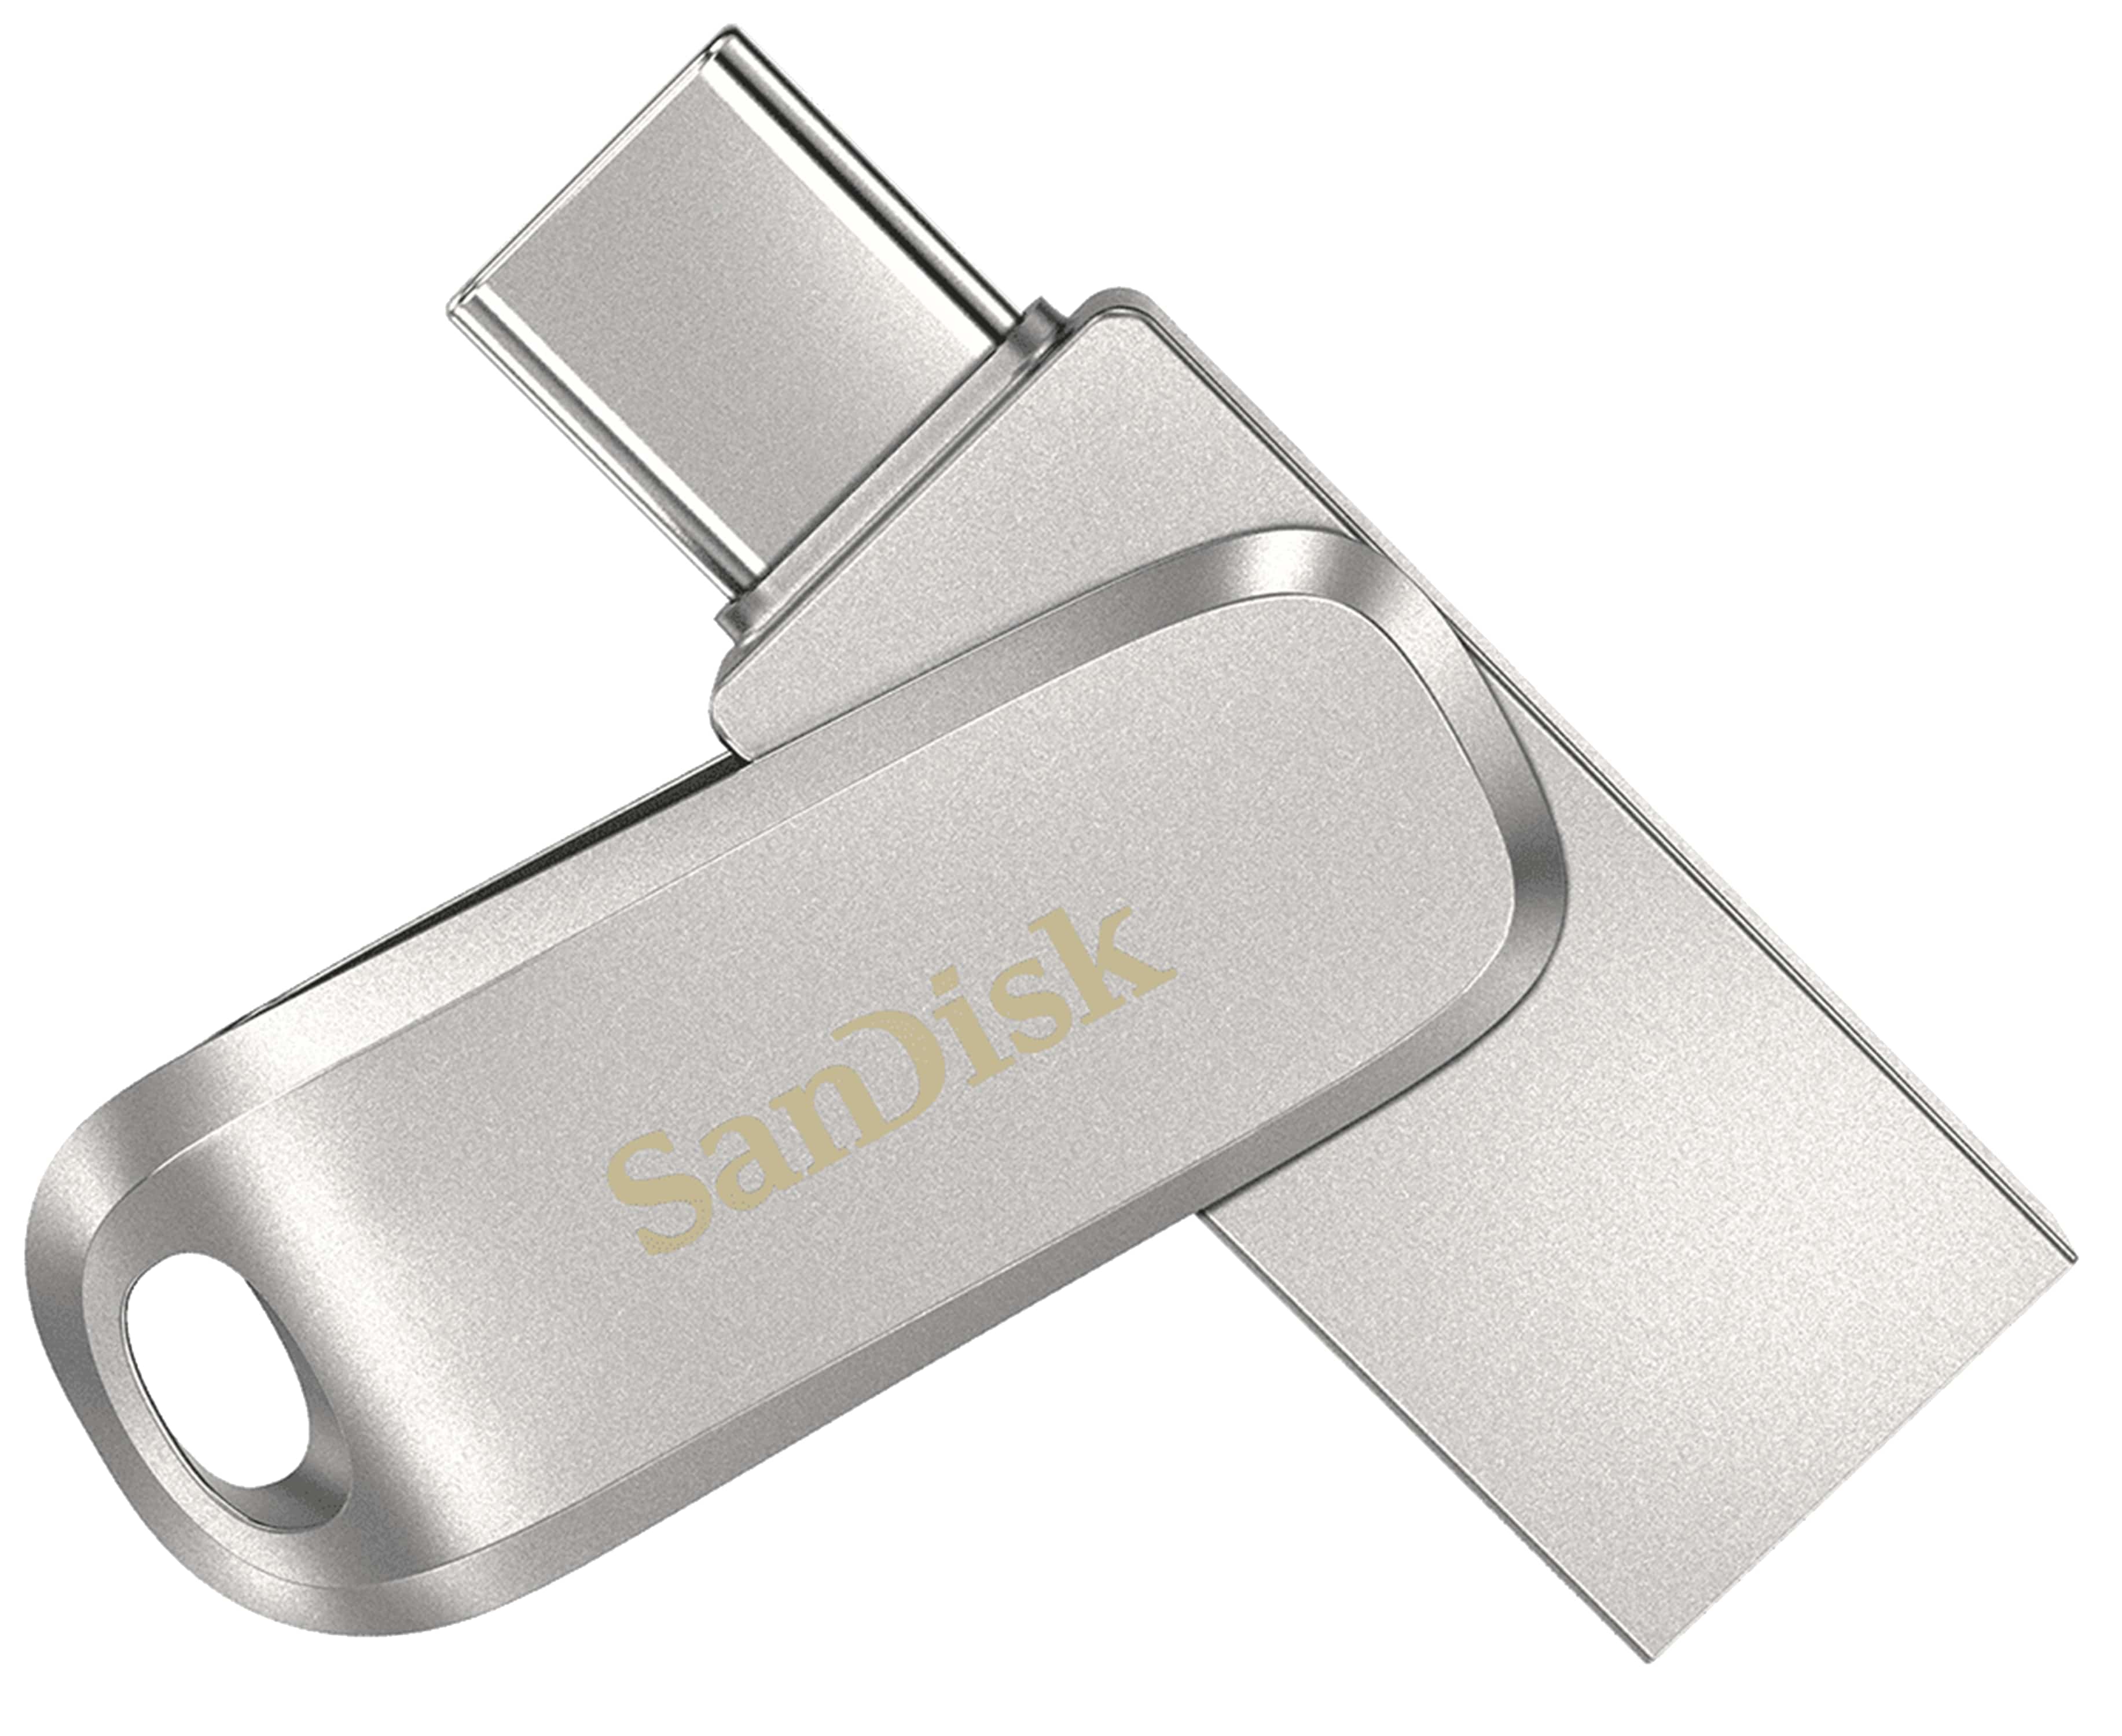 SANDISK USB Stick Ultra Dual Drive Luxe 128GB